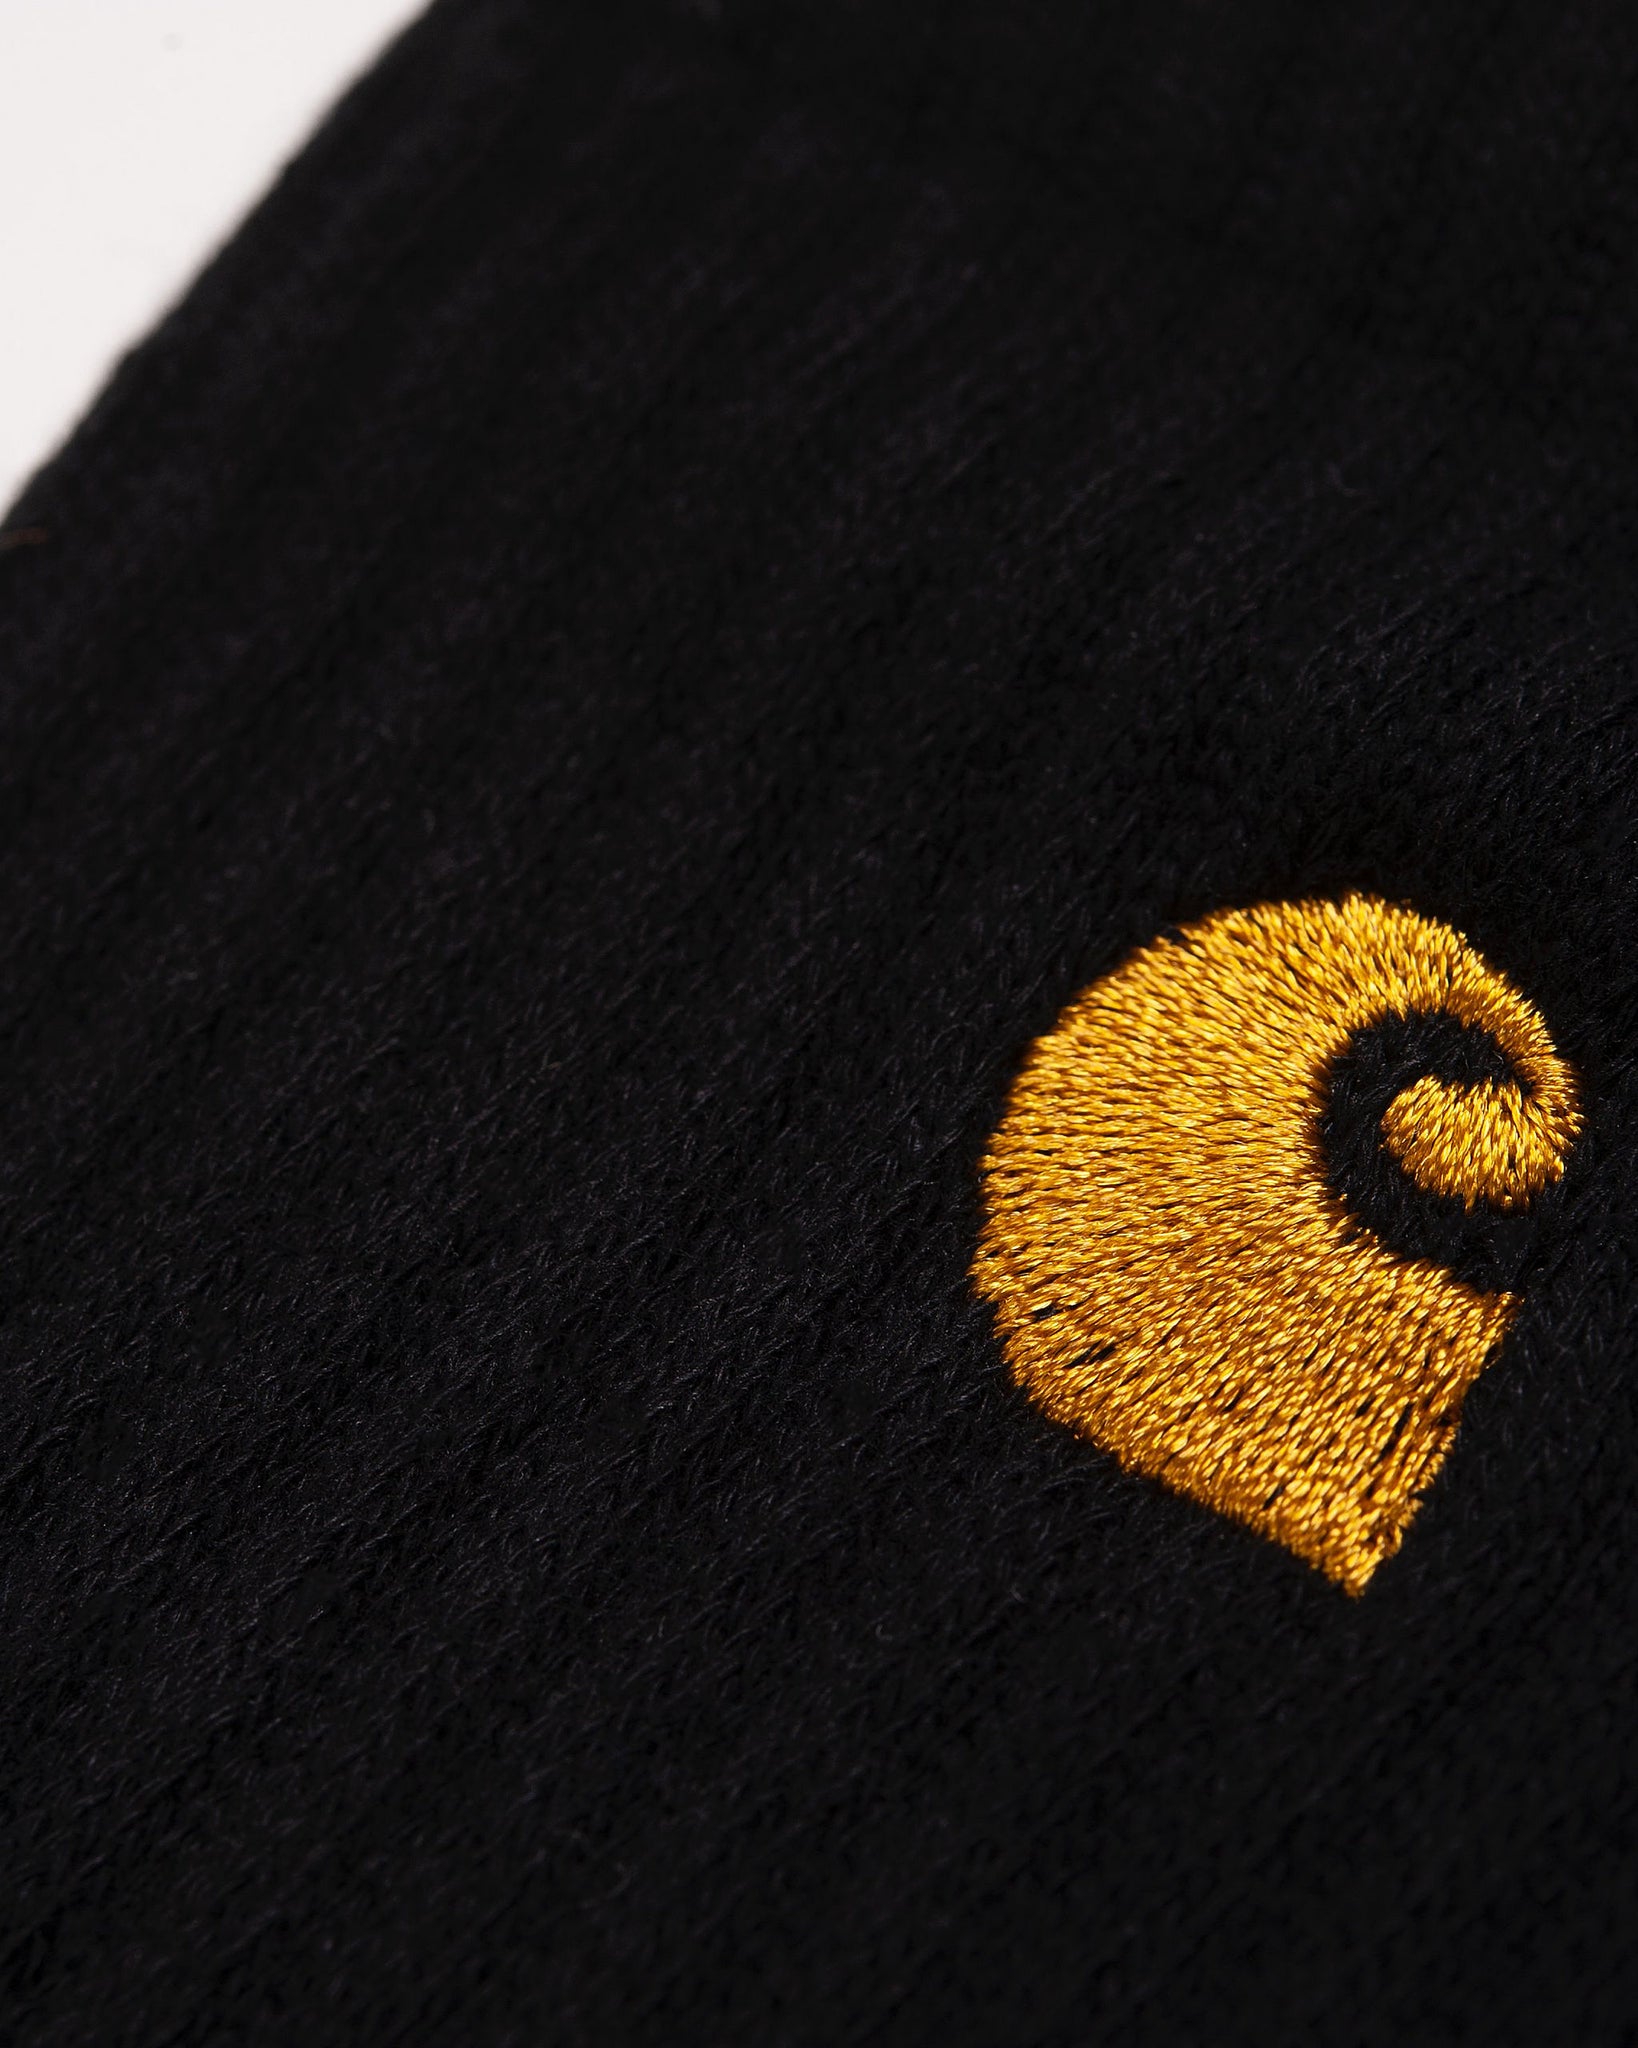 Calcetines Chase - Black/Gold